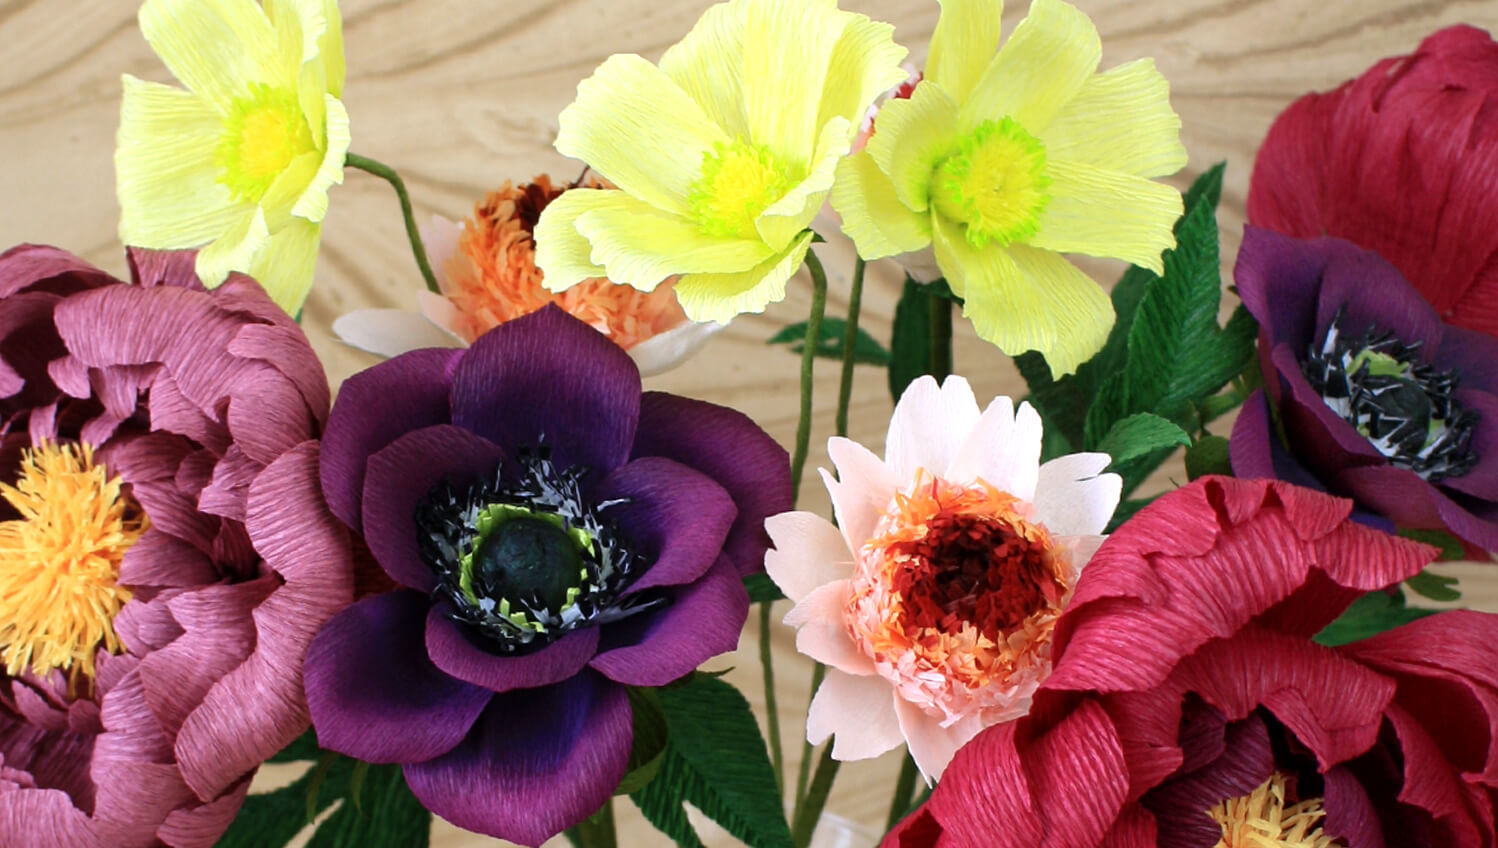 Sustainable handmande gifts,closeup of multi-coloured paper flowers